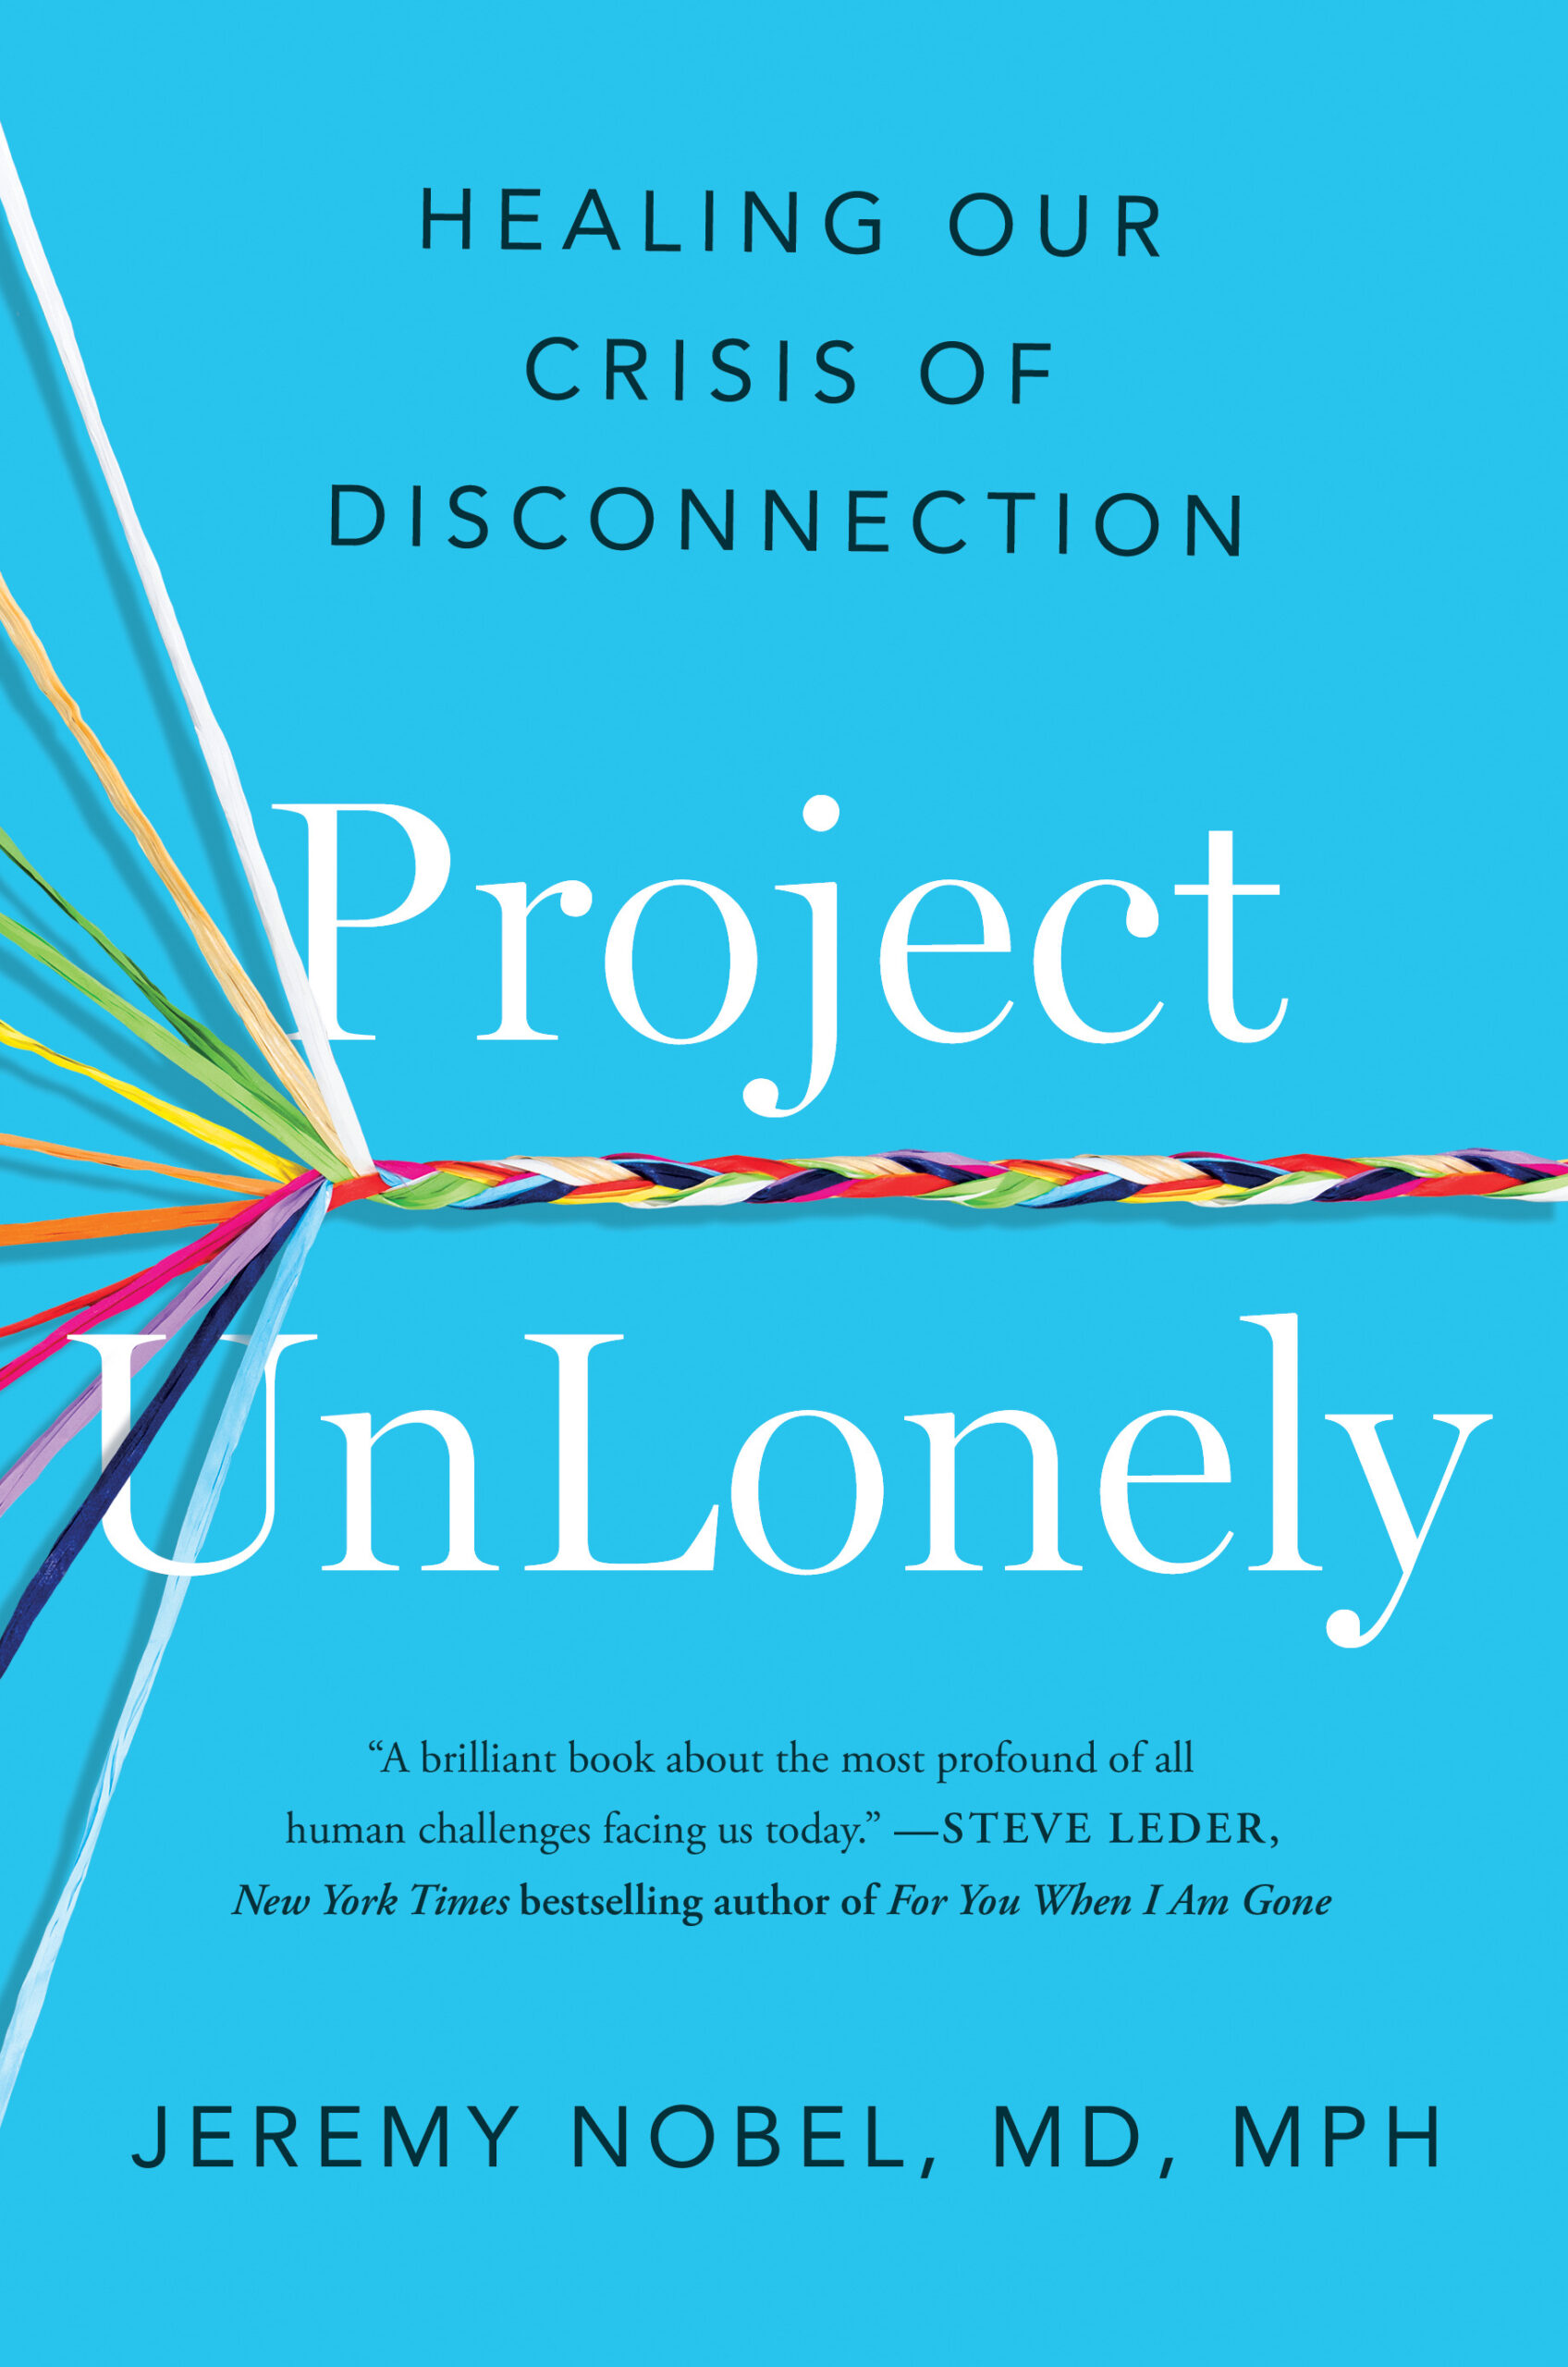 Book Launch: Project UnLonely: Healing Our Crisis of Disconnection by Jeremy Nobel MD in conversation with Danielle Ofri